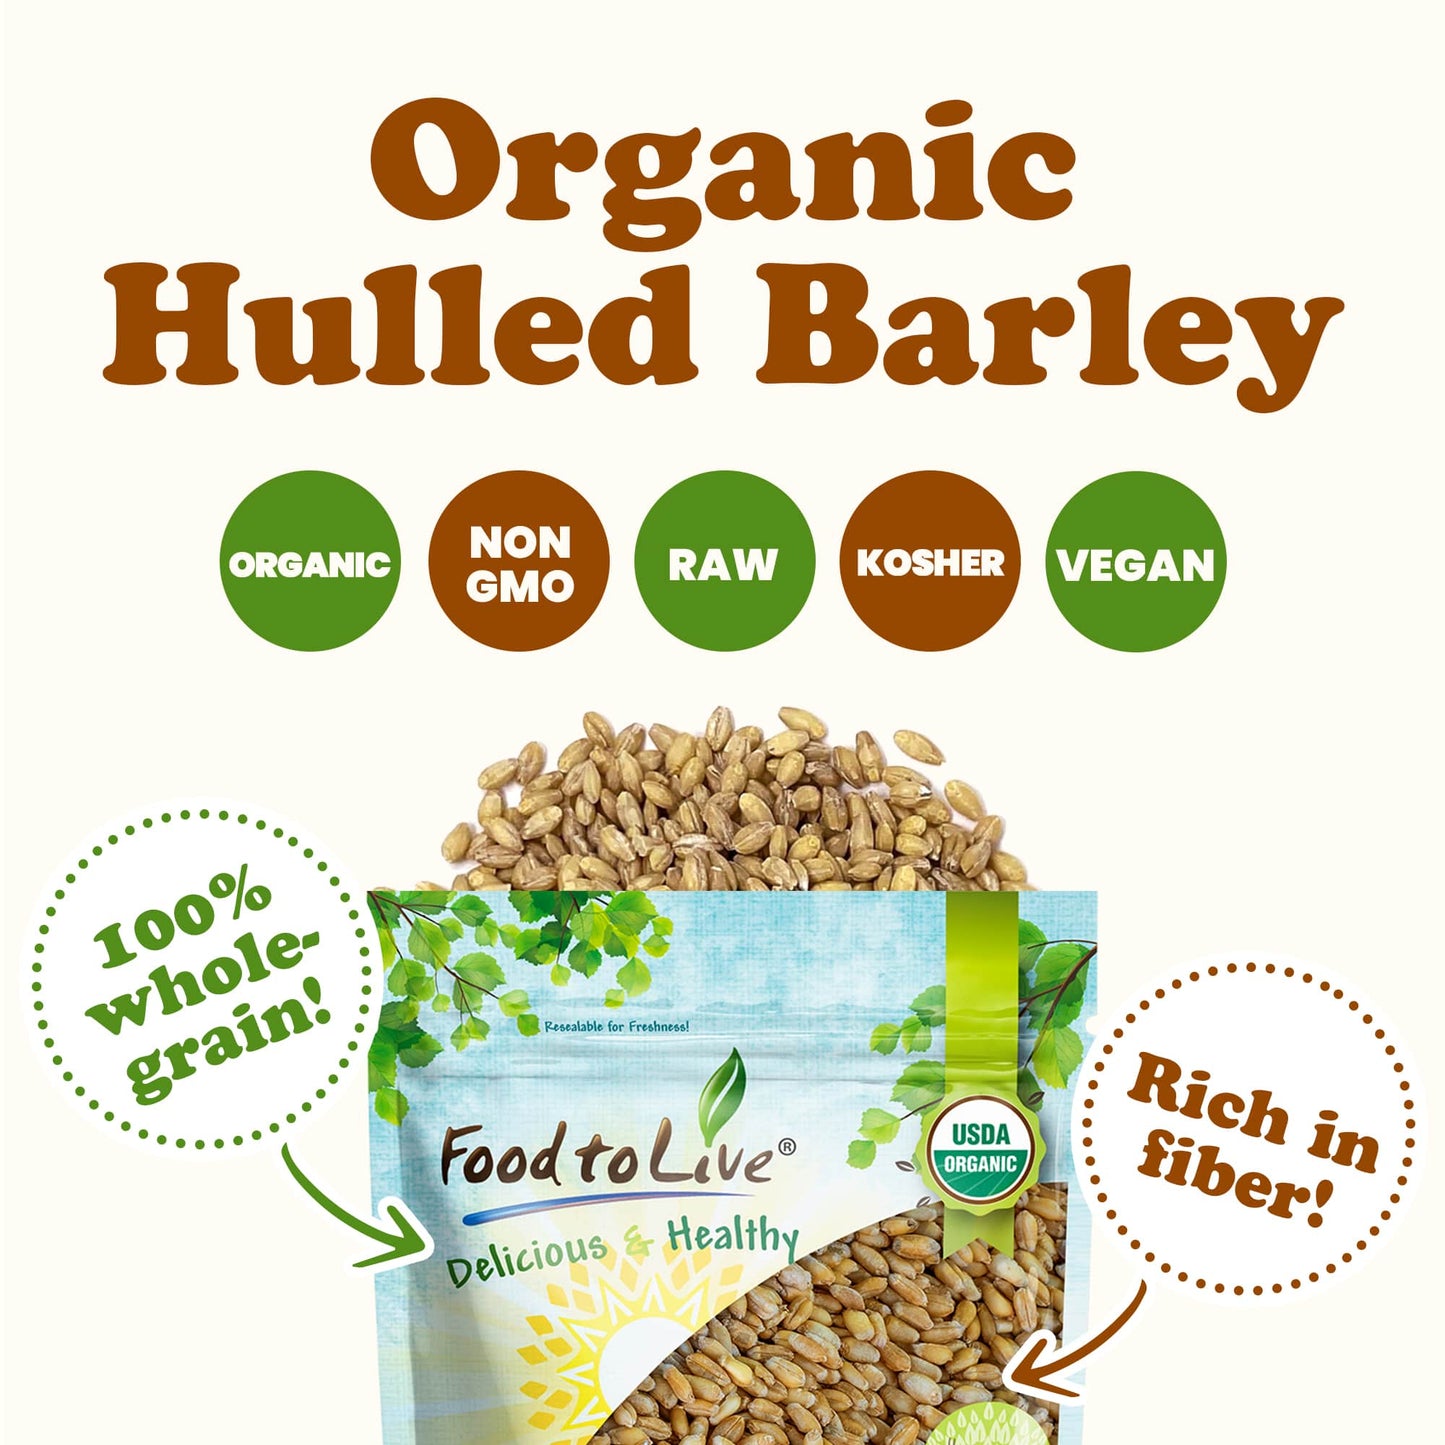 Organic Hulled Barley - Non-GMO, Kosher, Raw, Bulk Grain, Product of the USA - by Food to Live